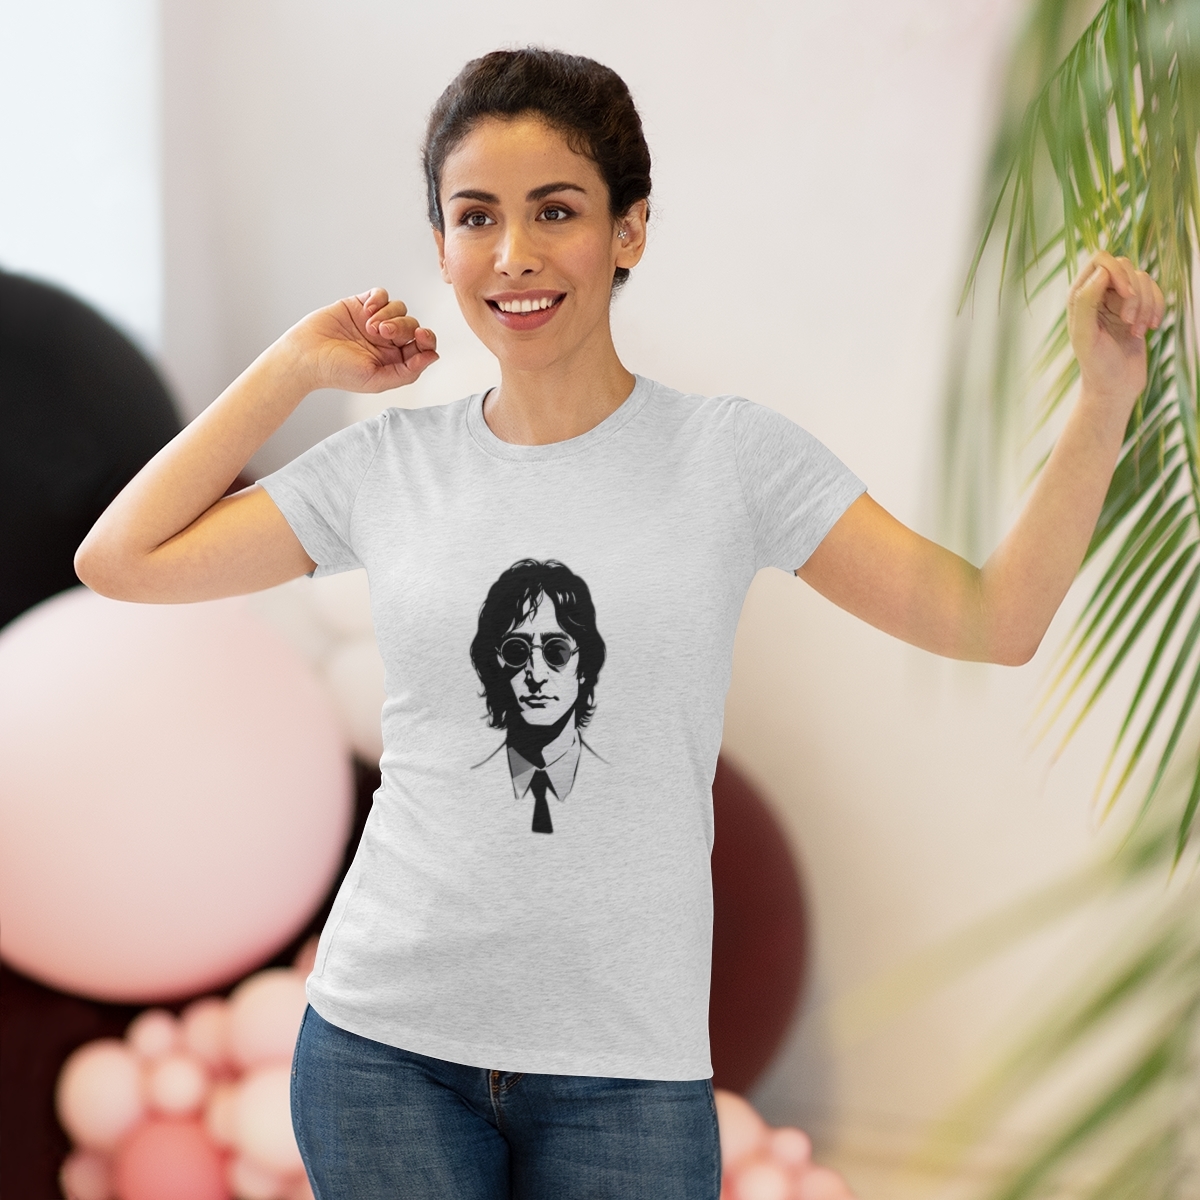 Primary image for John Lennon Triblend Tee: Vintage Portrait, Music Icon, Unisex, Soft and Comfort